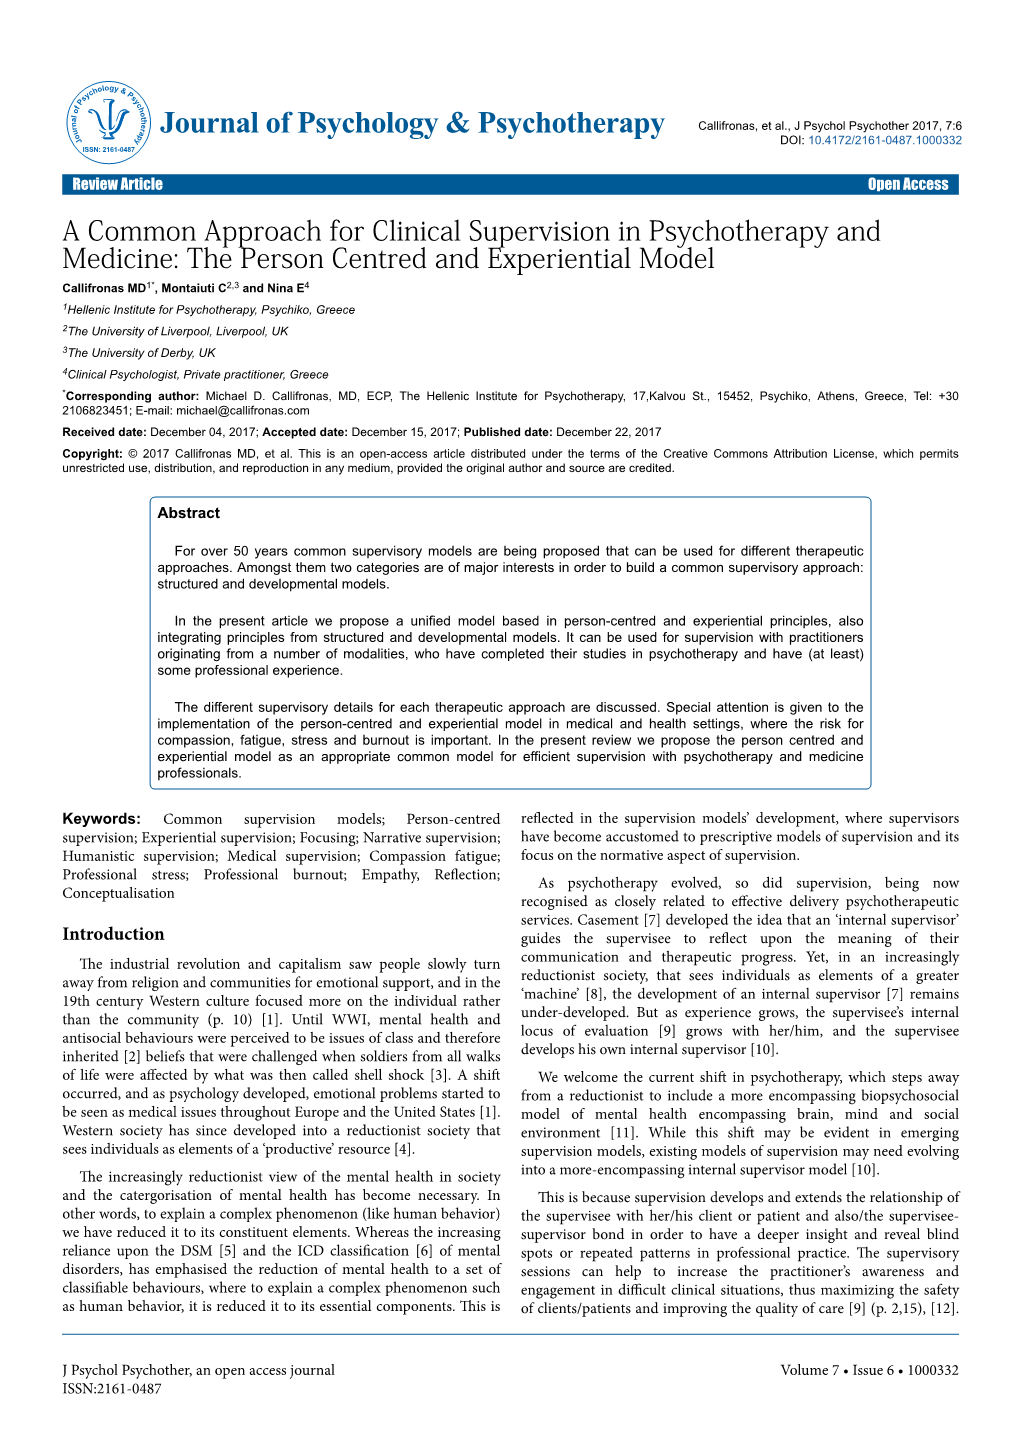 A Common Approach for Clinical Supervision in Psychotherapy and Medicine: the Person Centred and Experiential Model